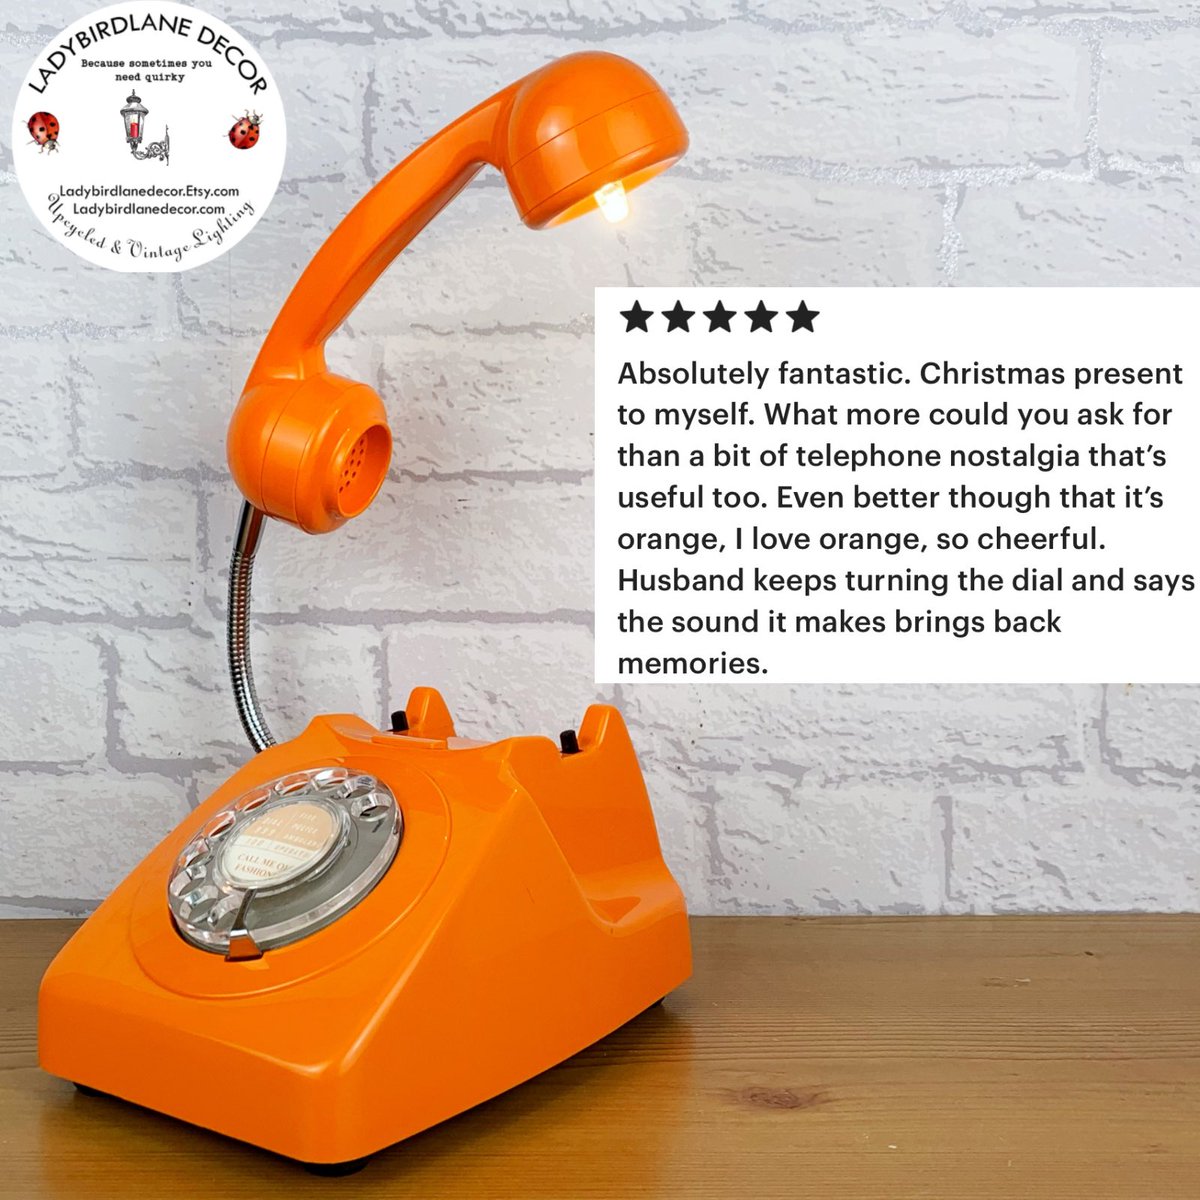 You can’t beat a bit of orange to brighten things up. Our Retro Telephone Lamps always get fabulous reviews and there are so many colours to choose from. Personalise it with a name or a nostalgic phone number in the middle to make it special. #UKGiftAM #MHHSBD